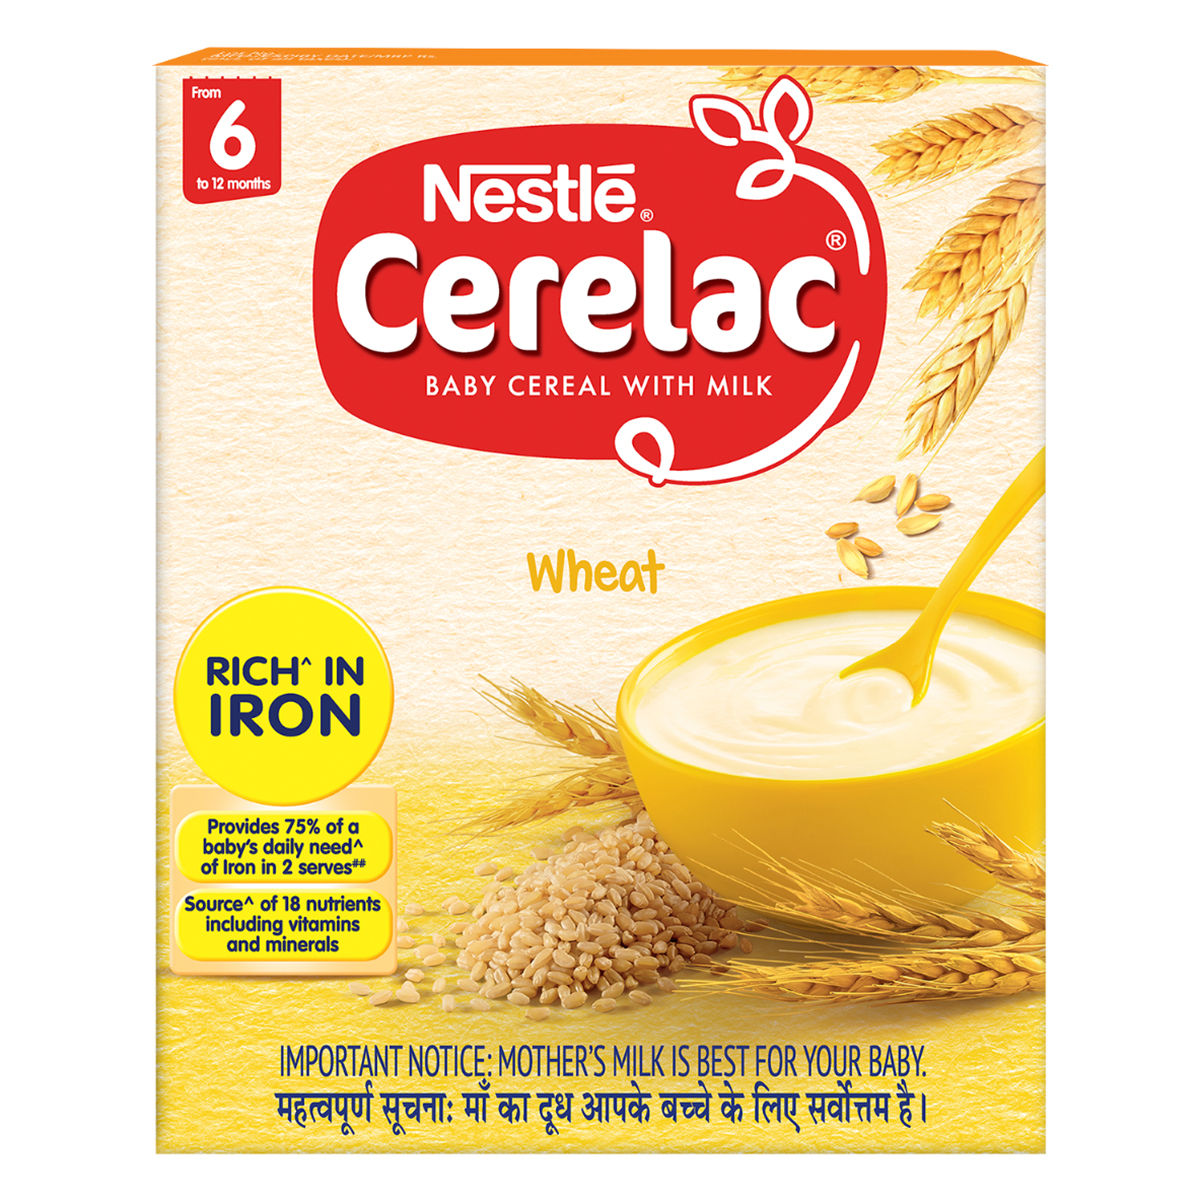 Buy Nestle Cerelac Baby Cereal with Milk Wheat (From 6 to 12 Months) Powder, 300 gm Refill Pack Online